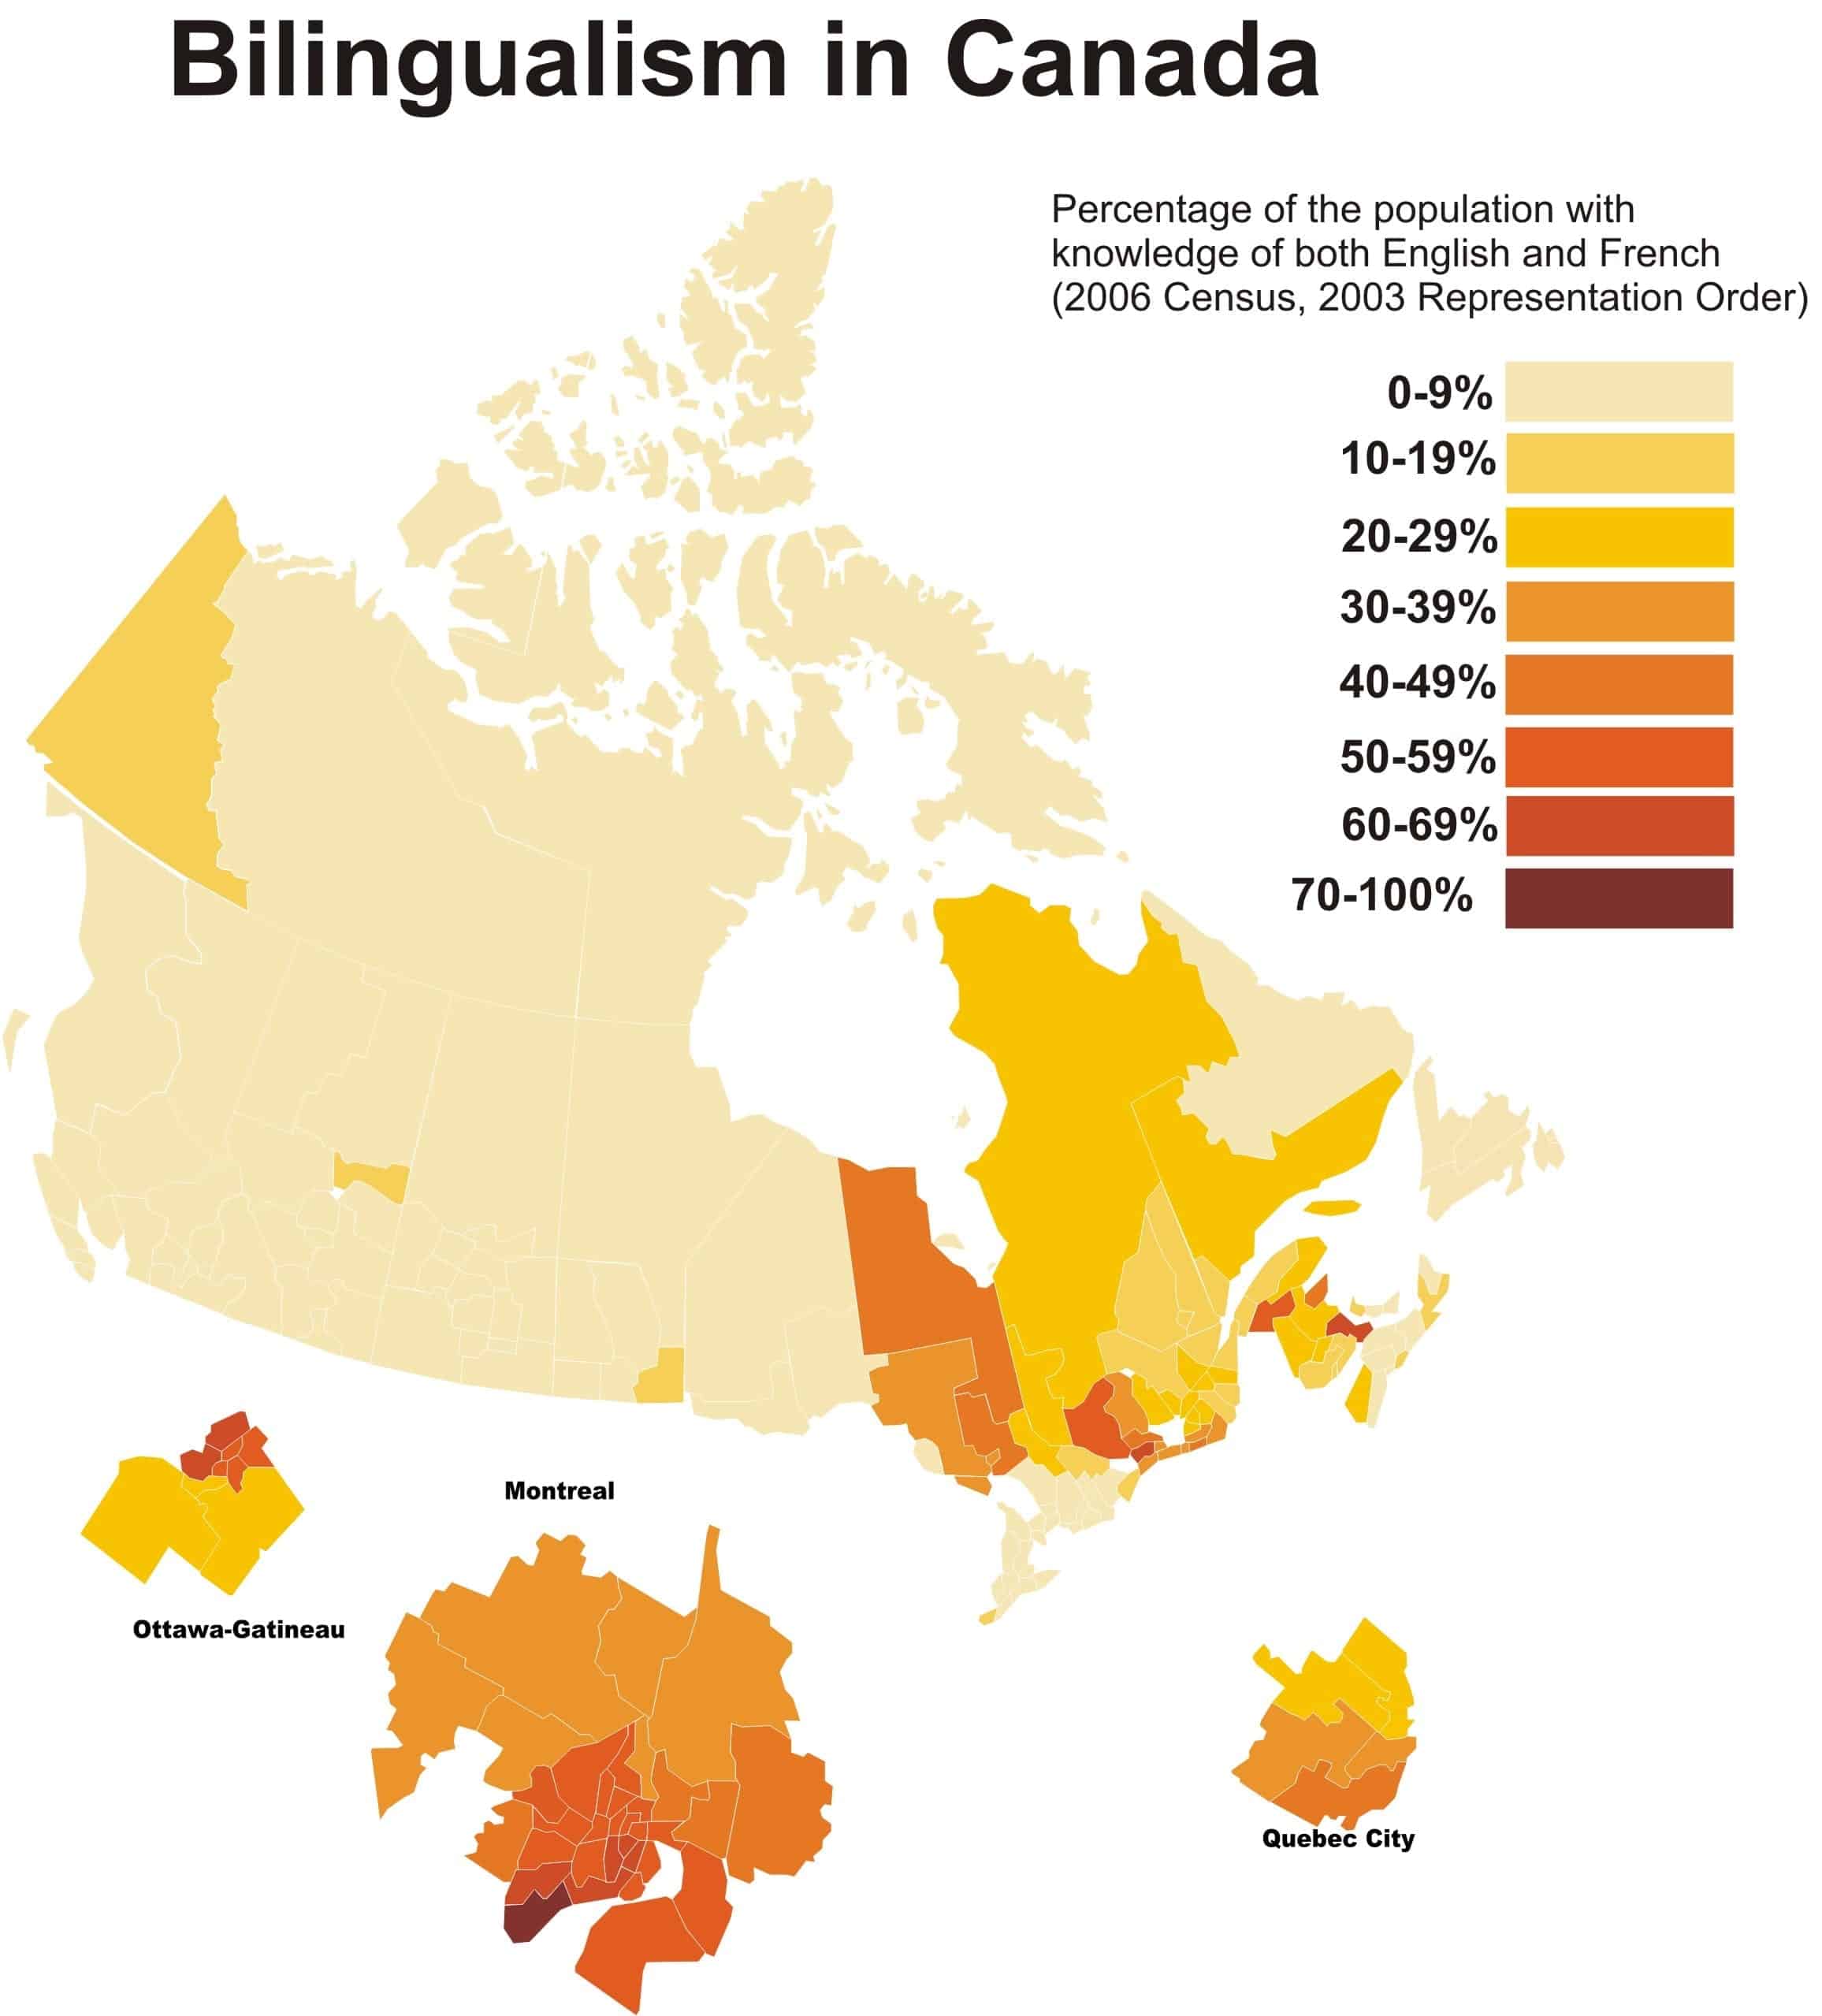 Bilingualism is on the decline in Canada